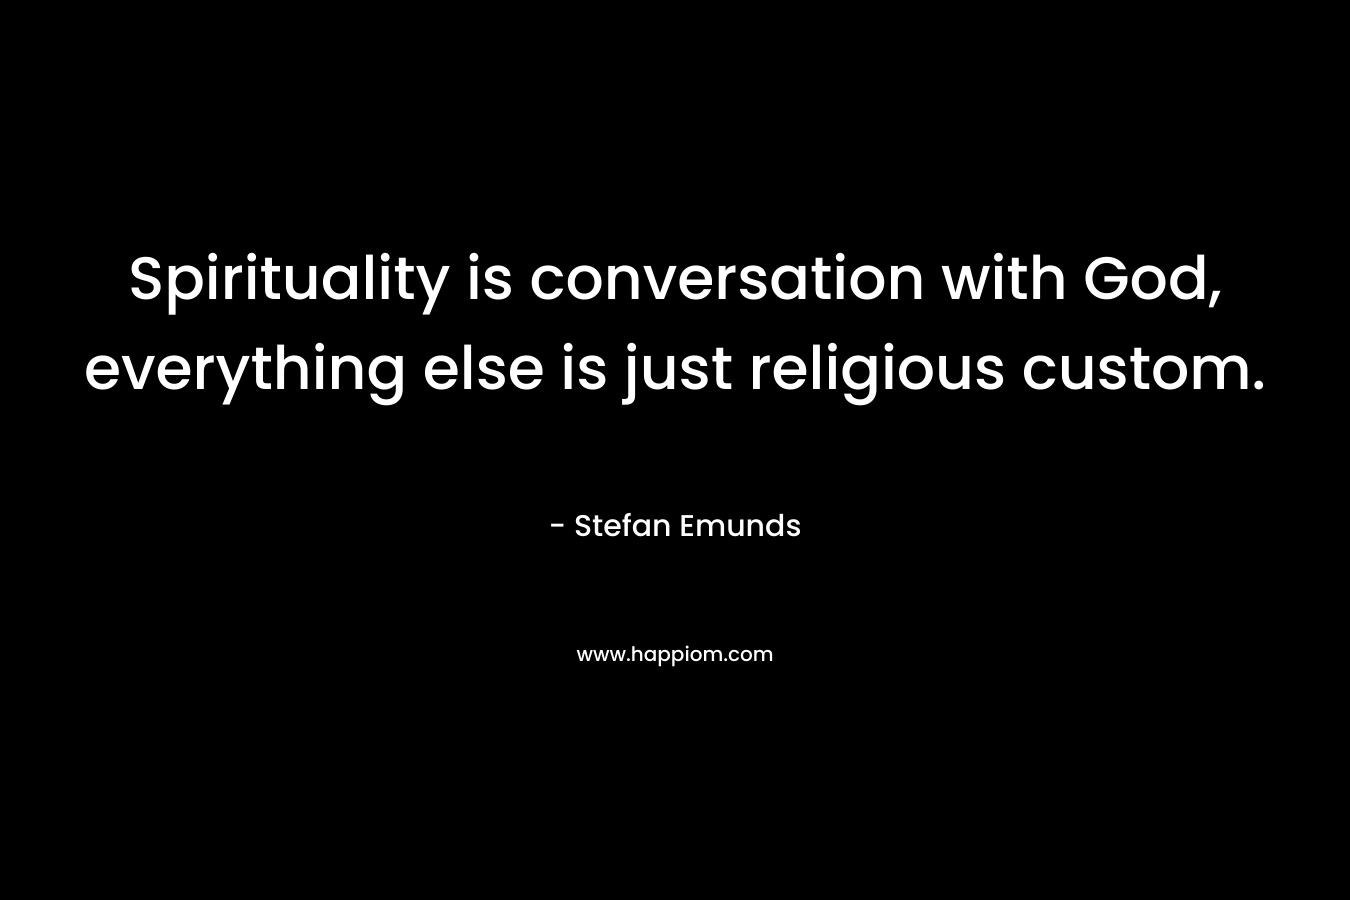 Spirituality is conversation with God, everything else is just religious custom.